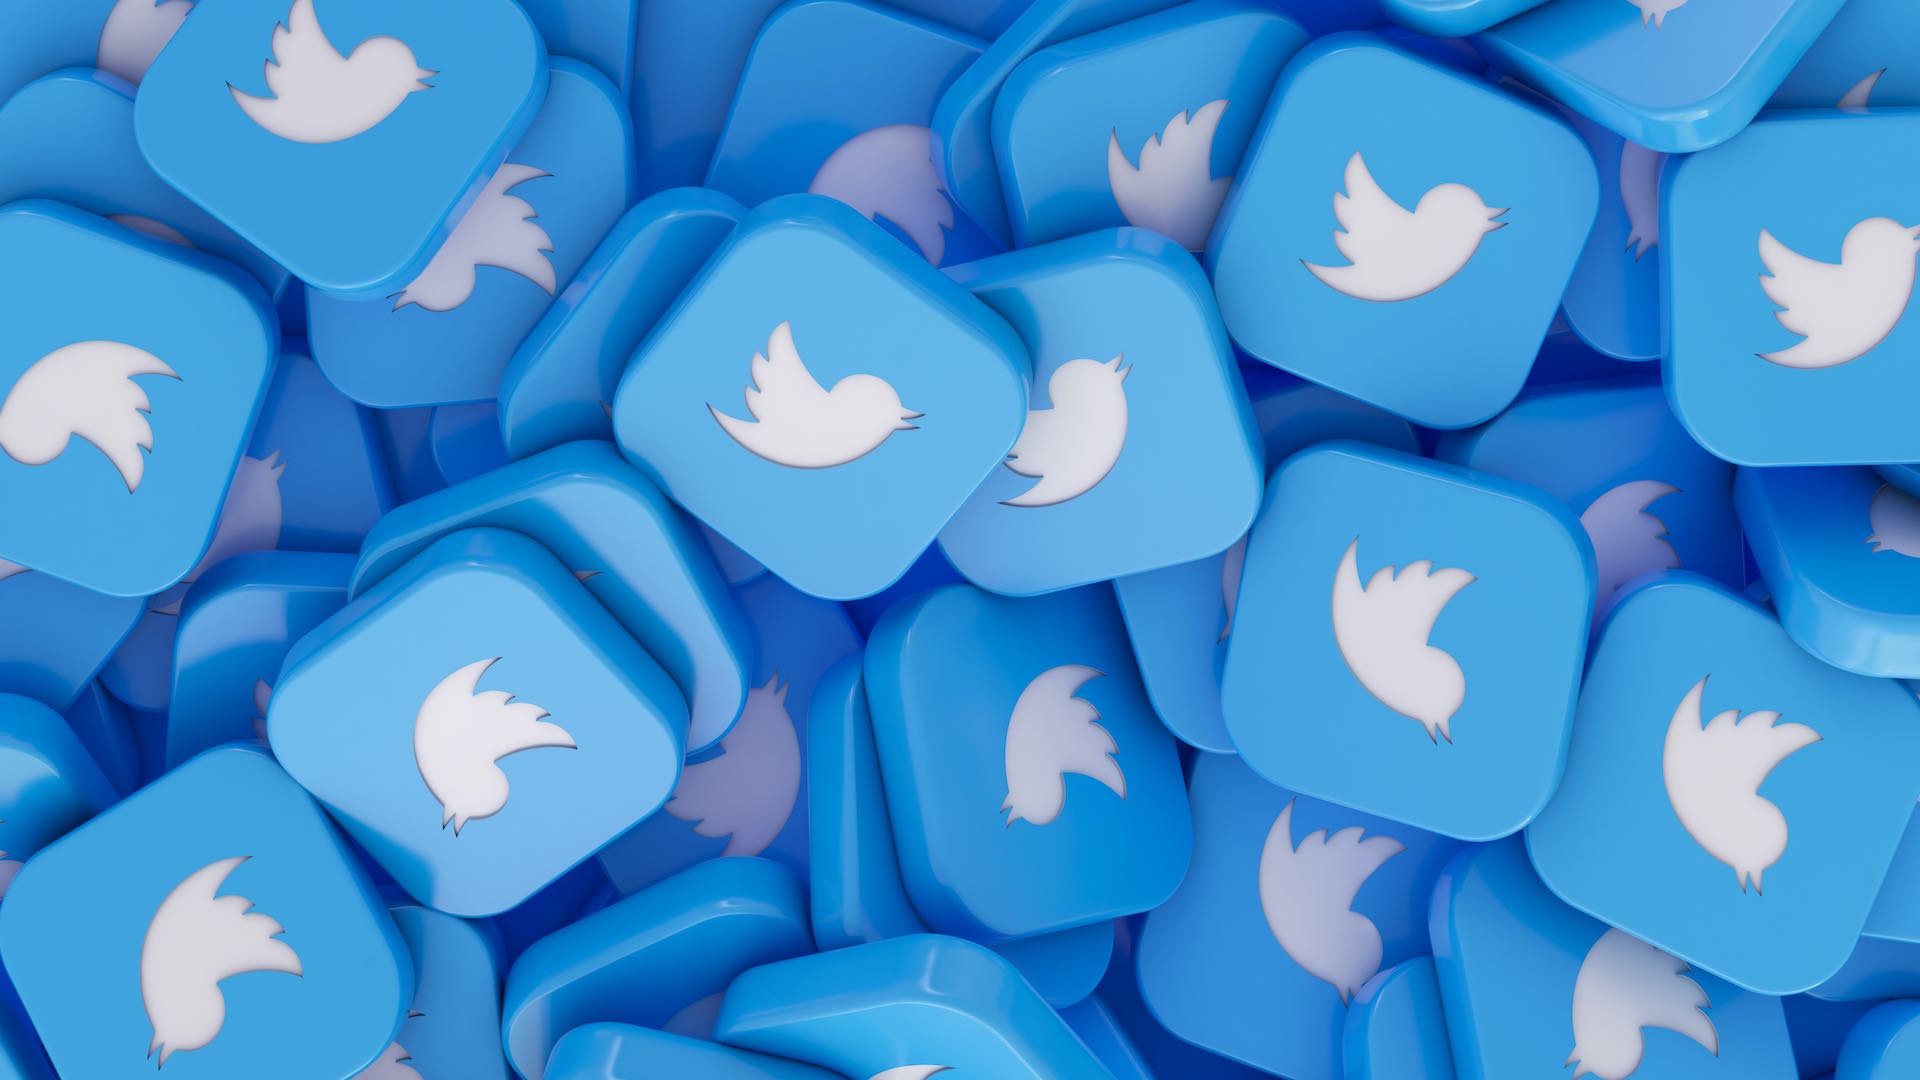 New Twitter verification system is already being abused by trolls